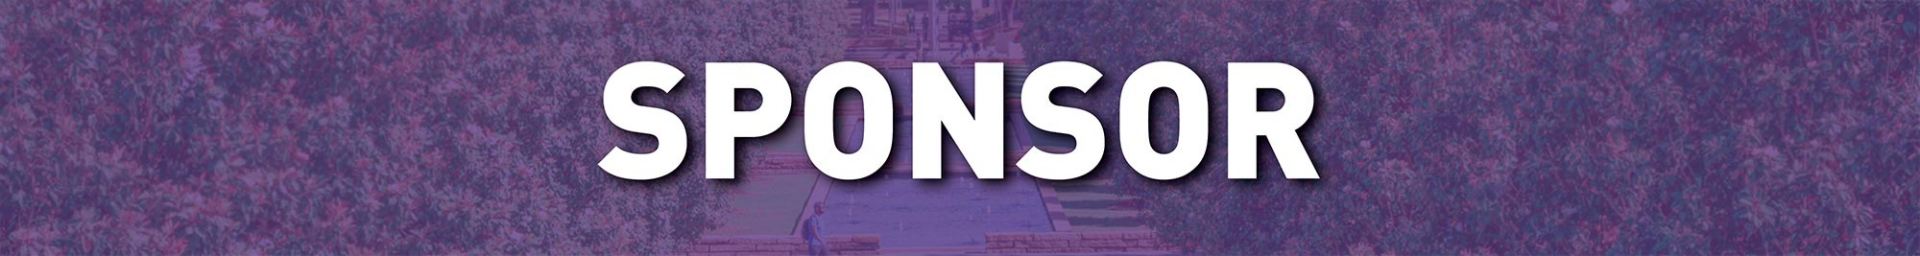 Become a Sponsor Page Banner